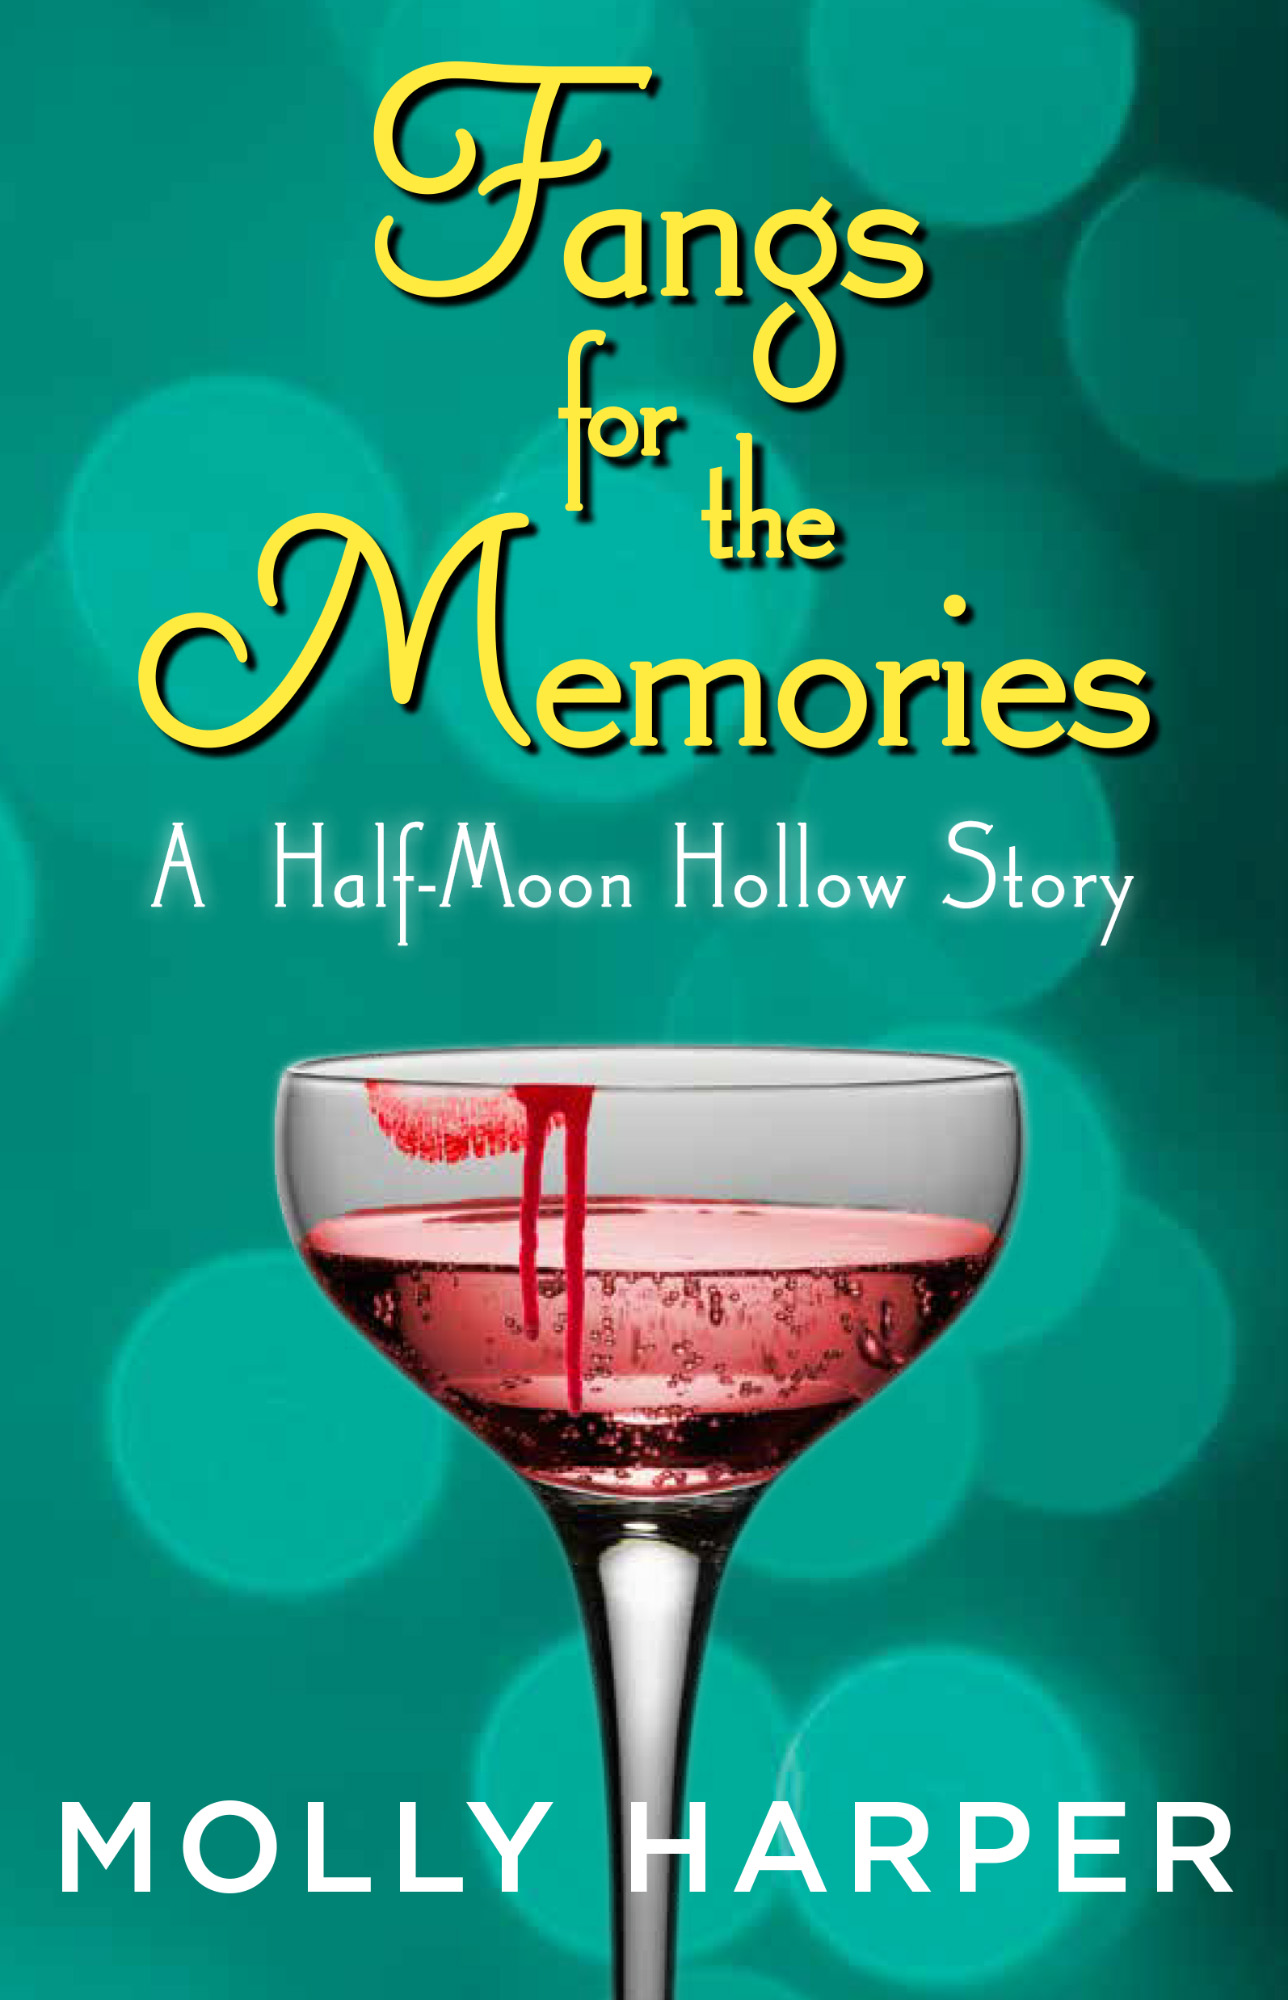 Fangs for the Memories by Molly Harper